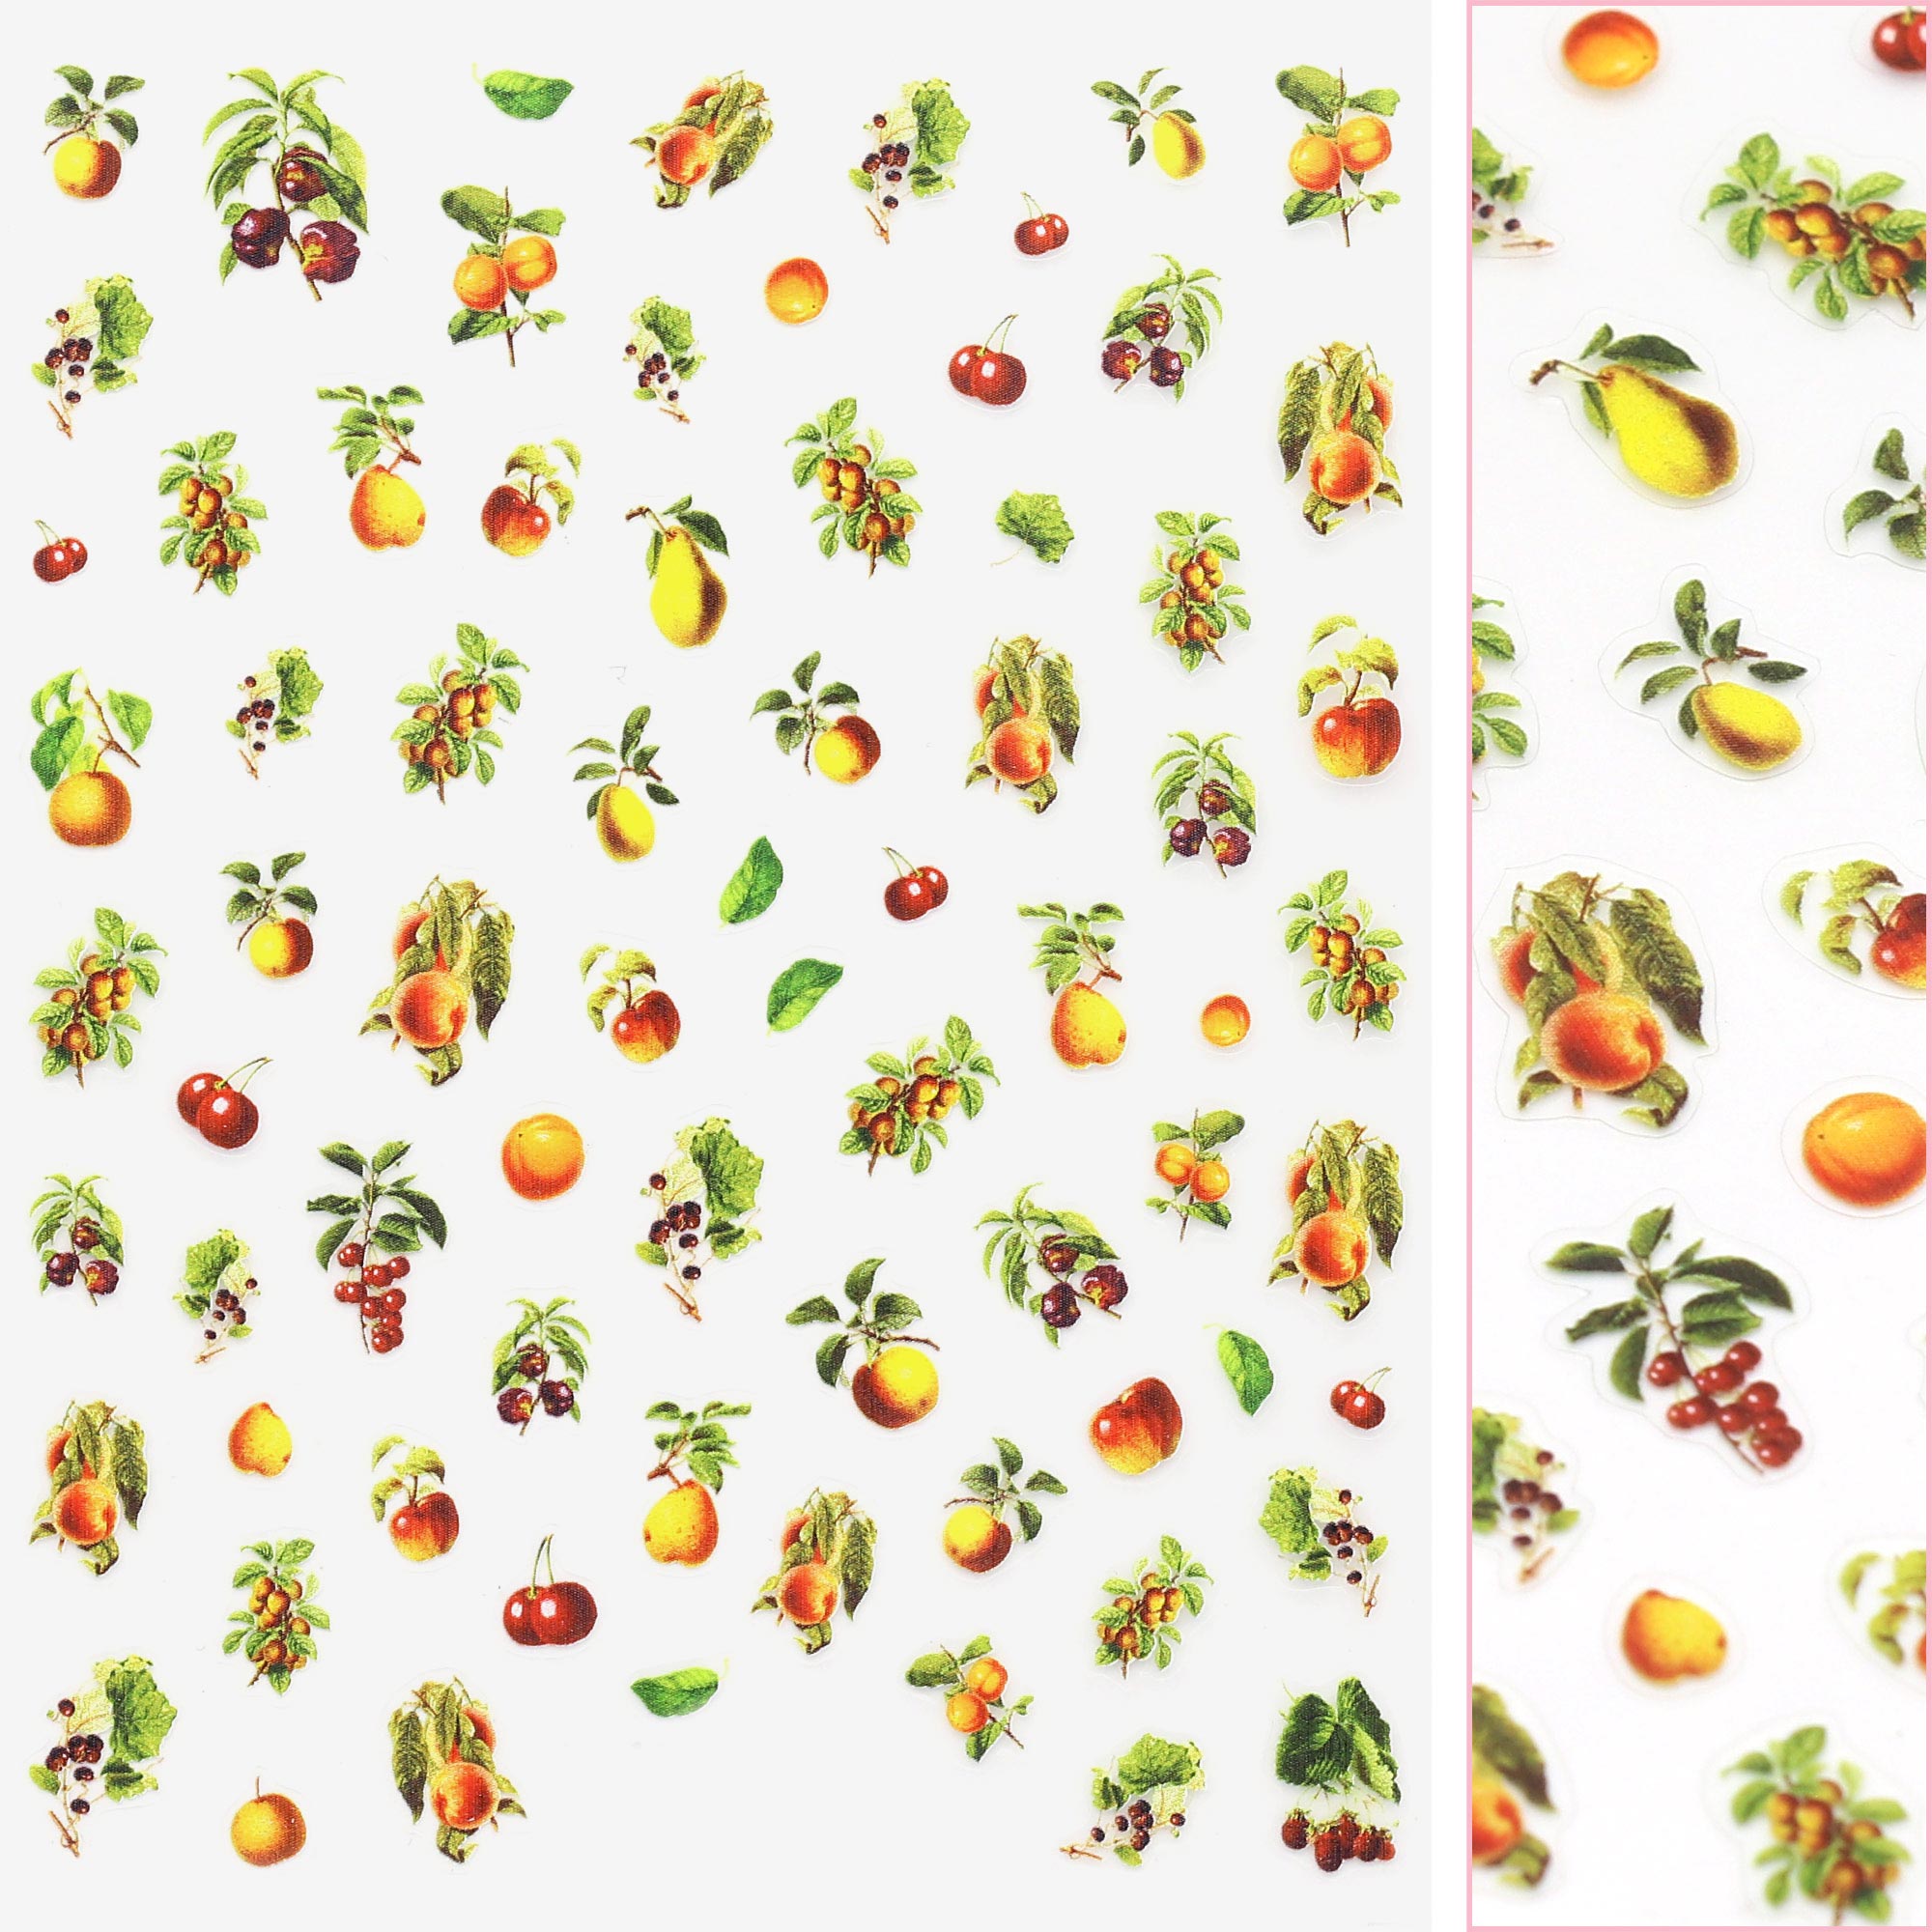 Floral Nail Art Sticker / Victorian Fruit Cherry Pear Apple Decal Print